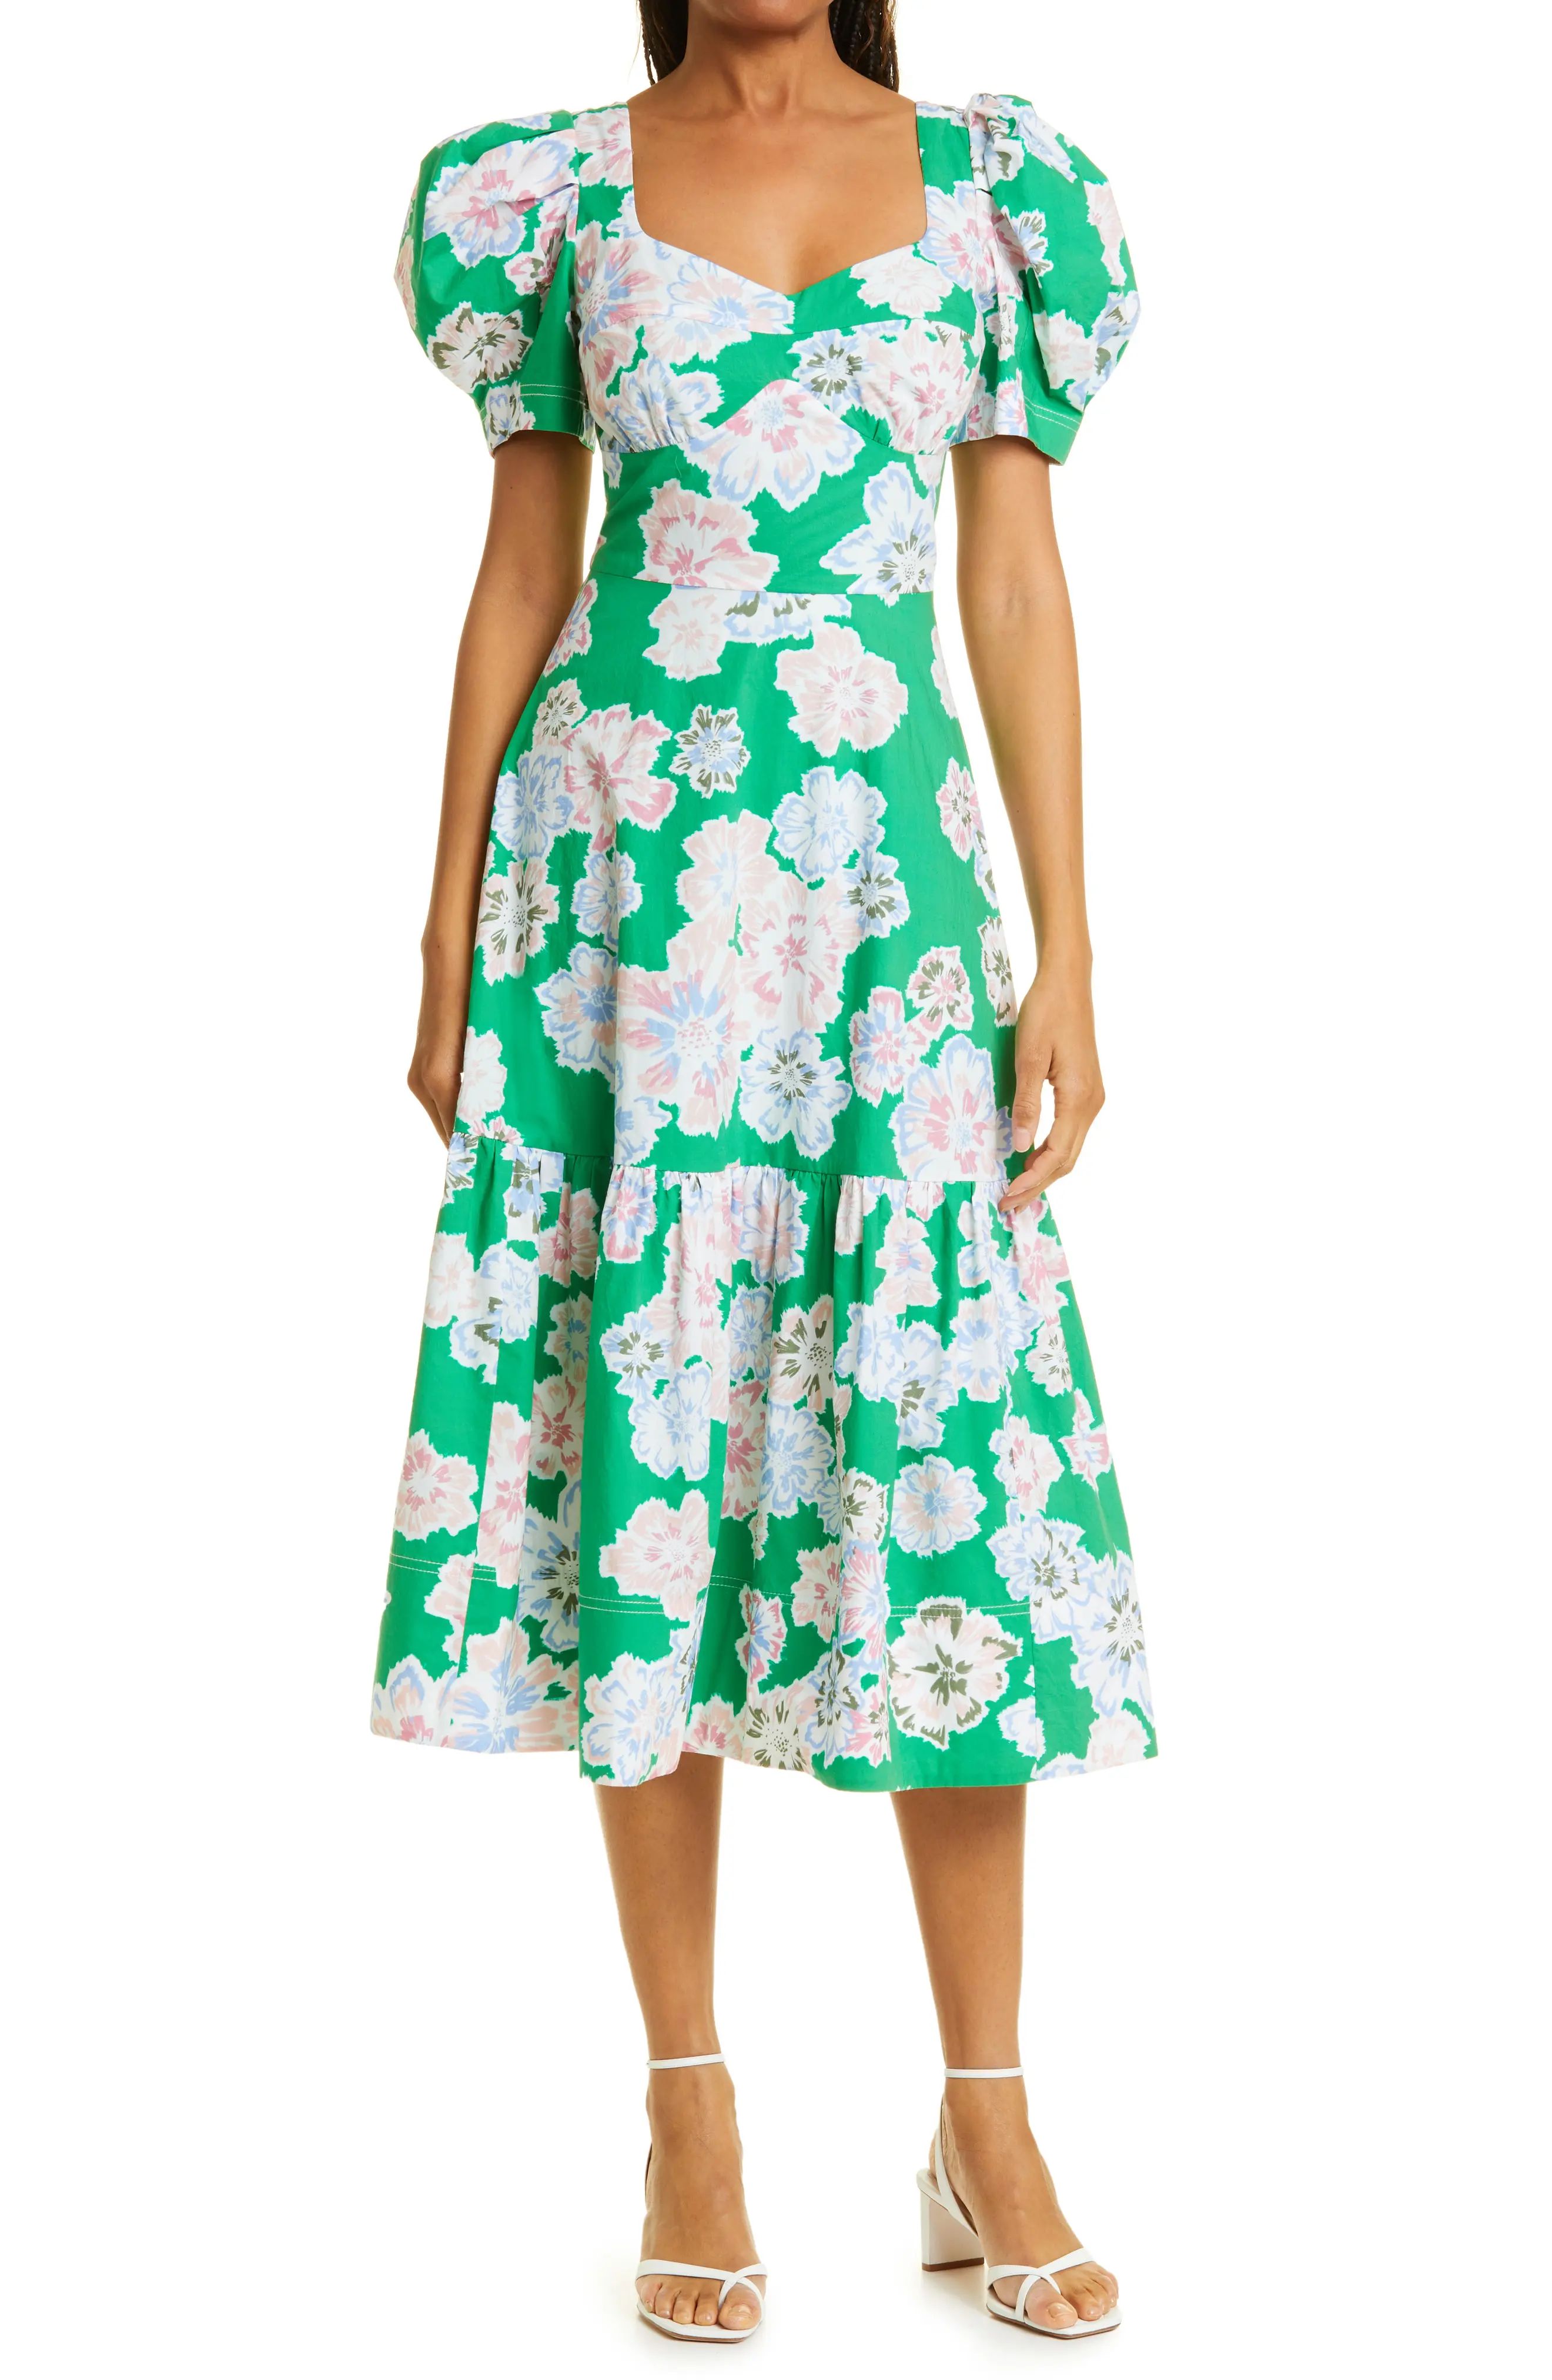 Tanya Taylor Danielle Floral Print Puff Sleeve Dress in Chalk Floral Kelly Green Multi at Nordstrom, | Nordstrom